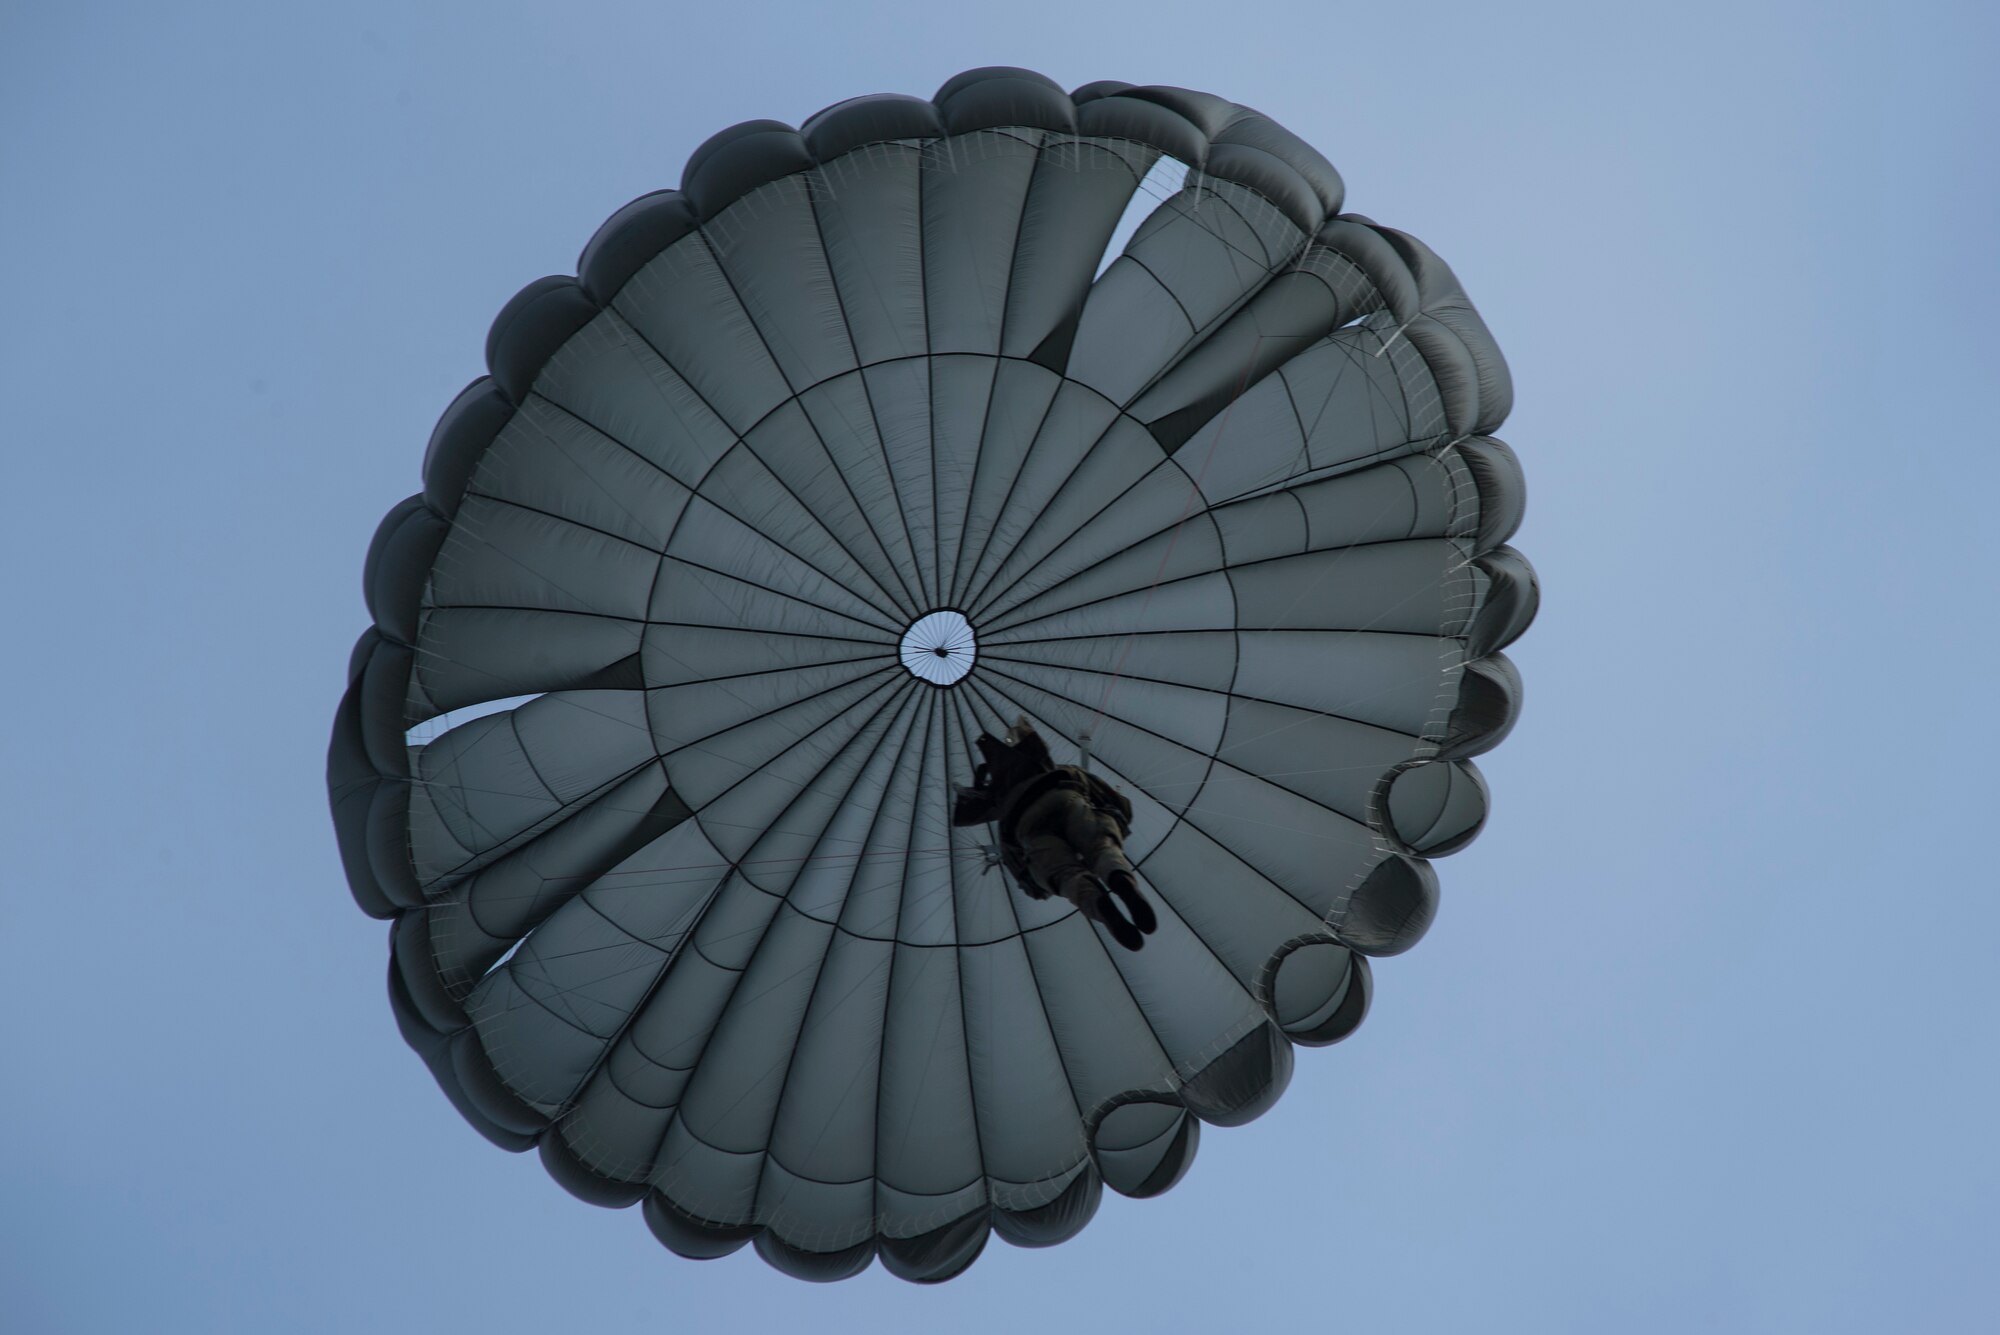 Santa and his helpers, along with members of the U.S. Air Force, U.S. Army, and seven partner nations conducted static-line and military freefall jumps for Operation Toy Drop 2018, over Alzey Drop Zone, Germany Dec. 11-13, 2018.